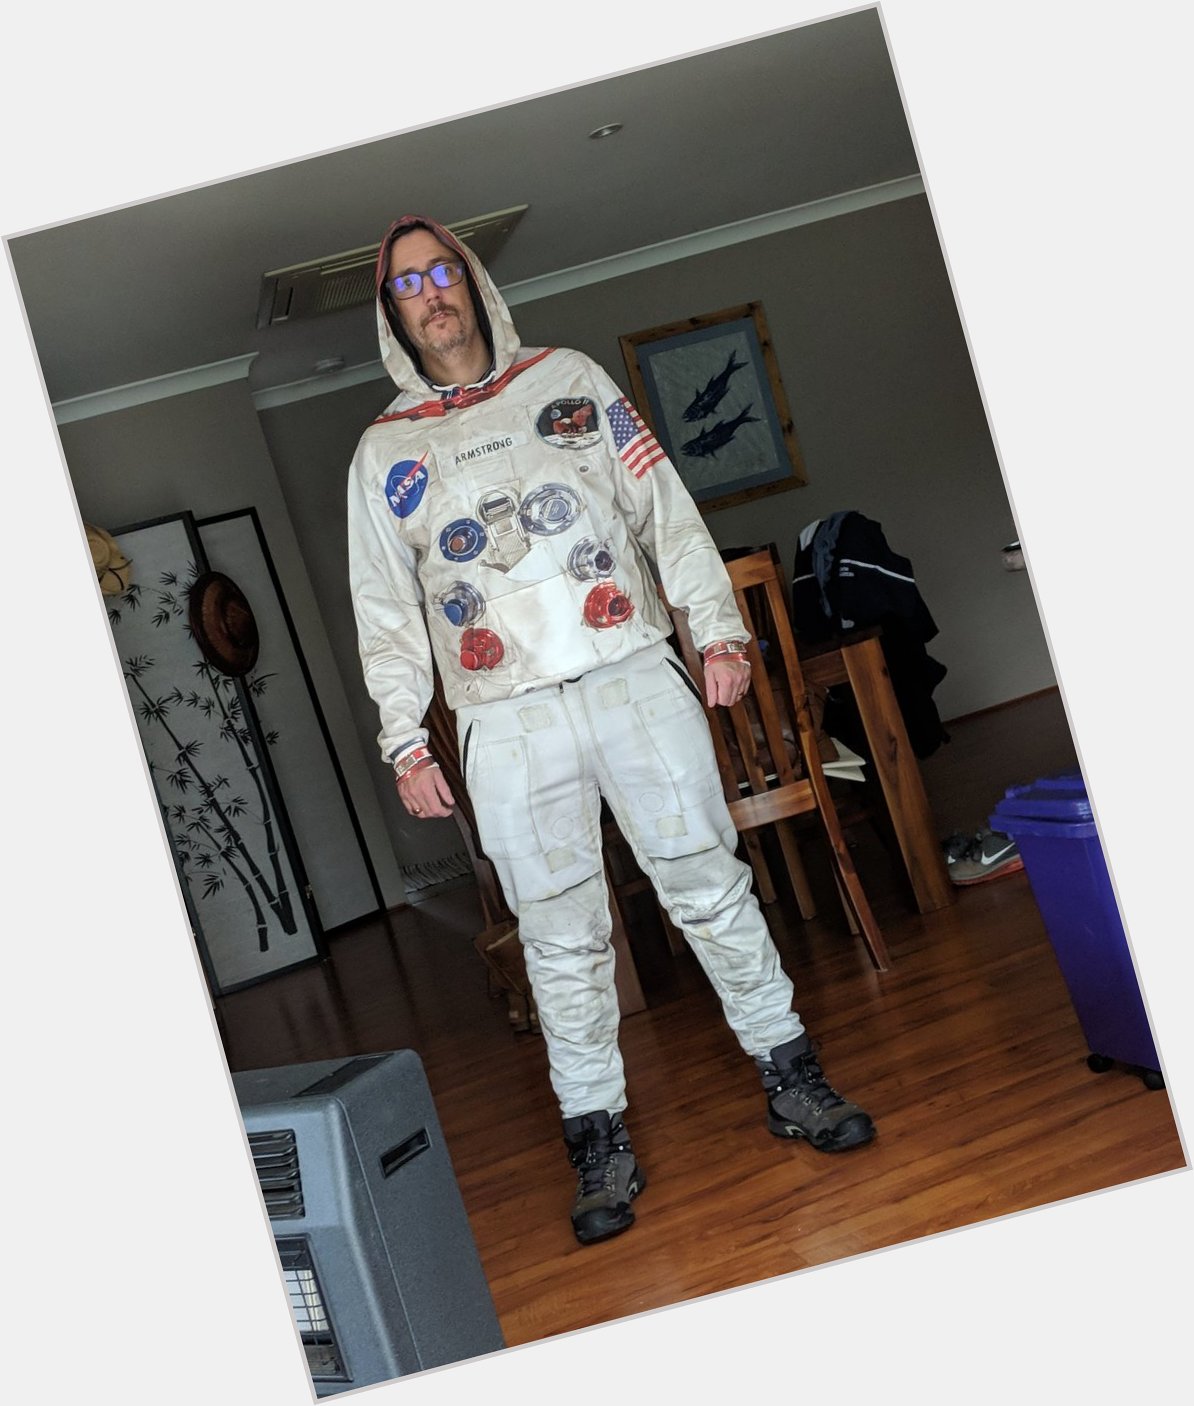  Here is my HaSS week dress up. Also happy birthday to Neil Armstrong! 